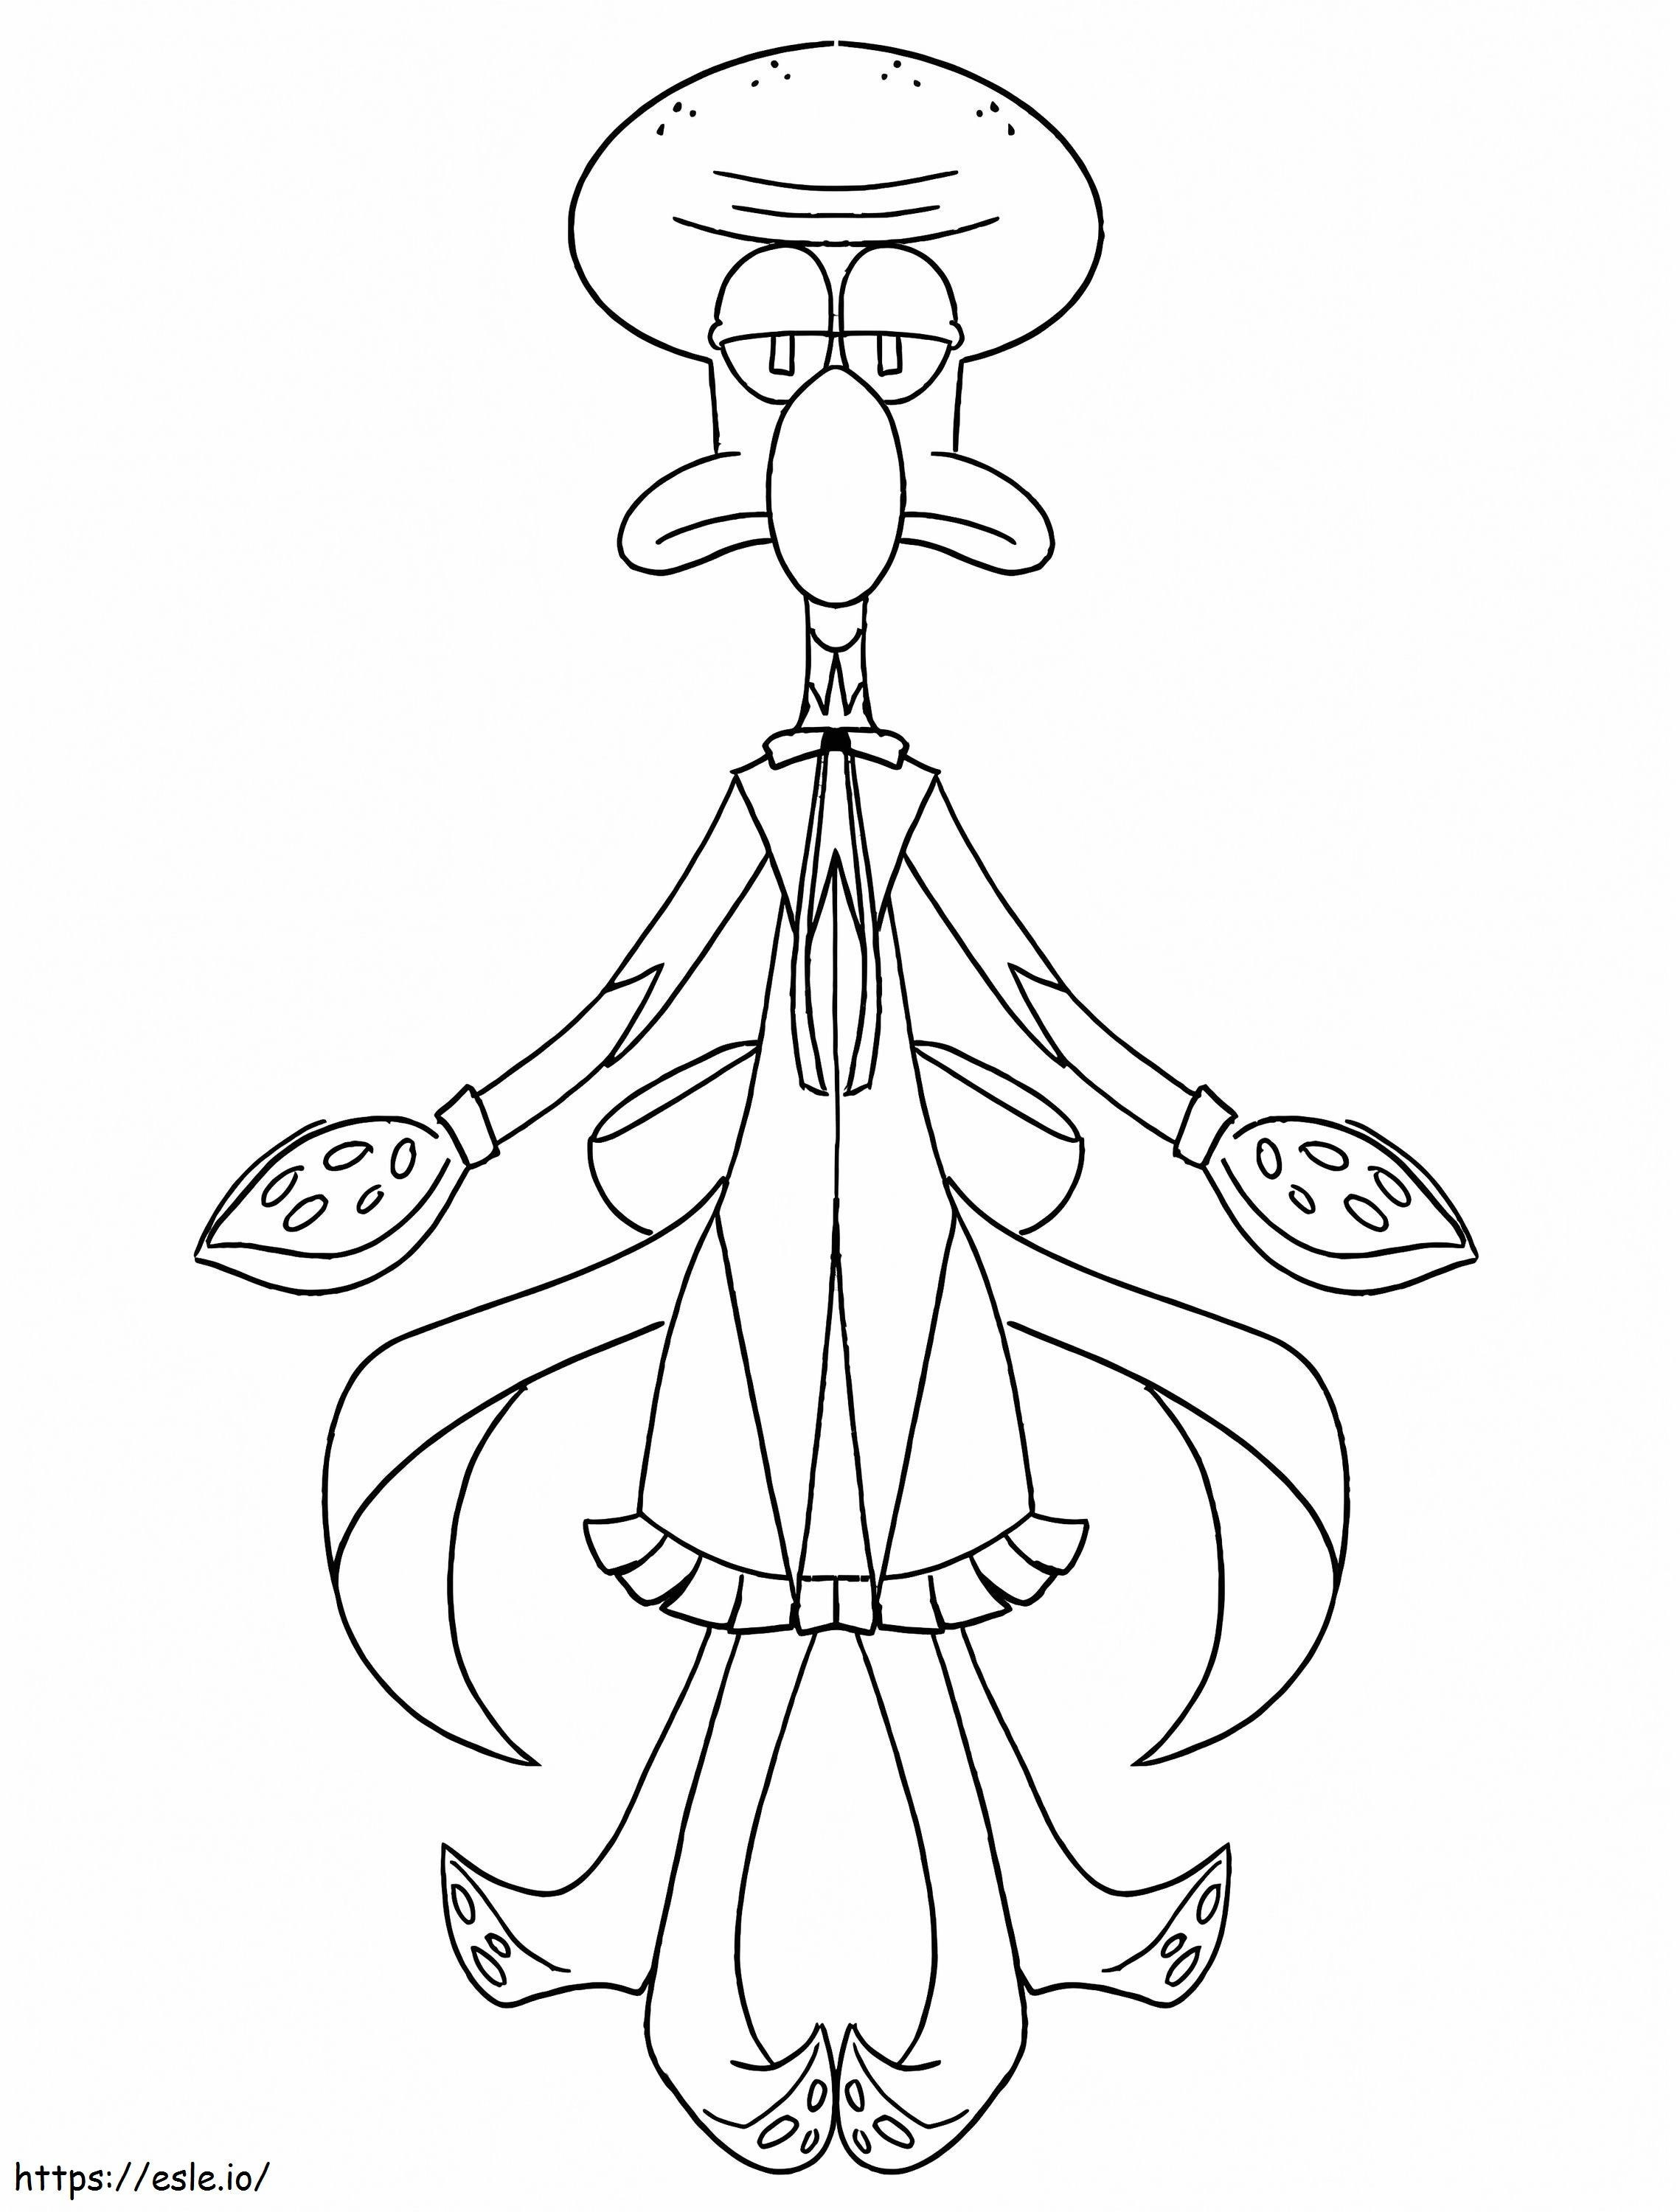 Cute Squidward coloring page